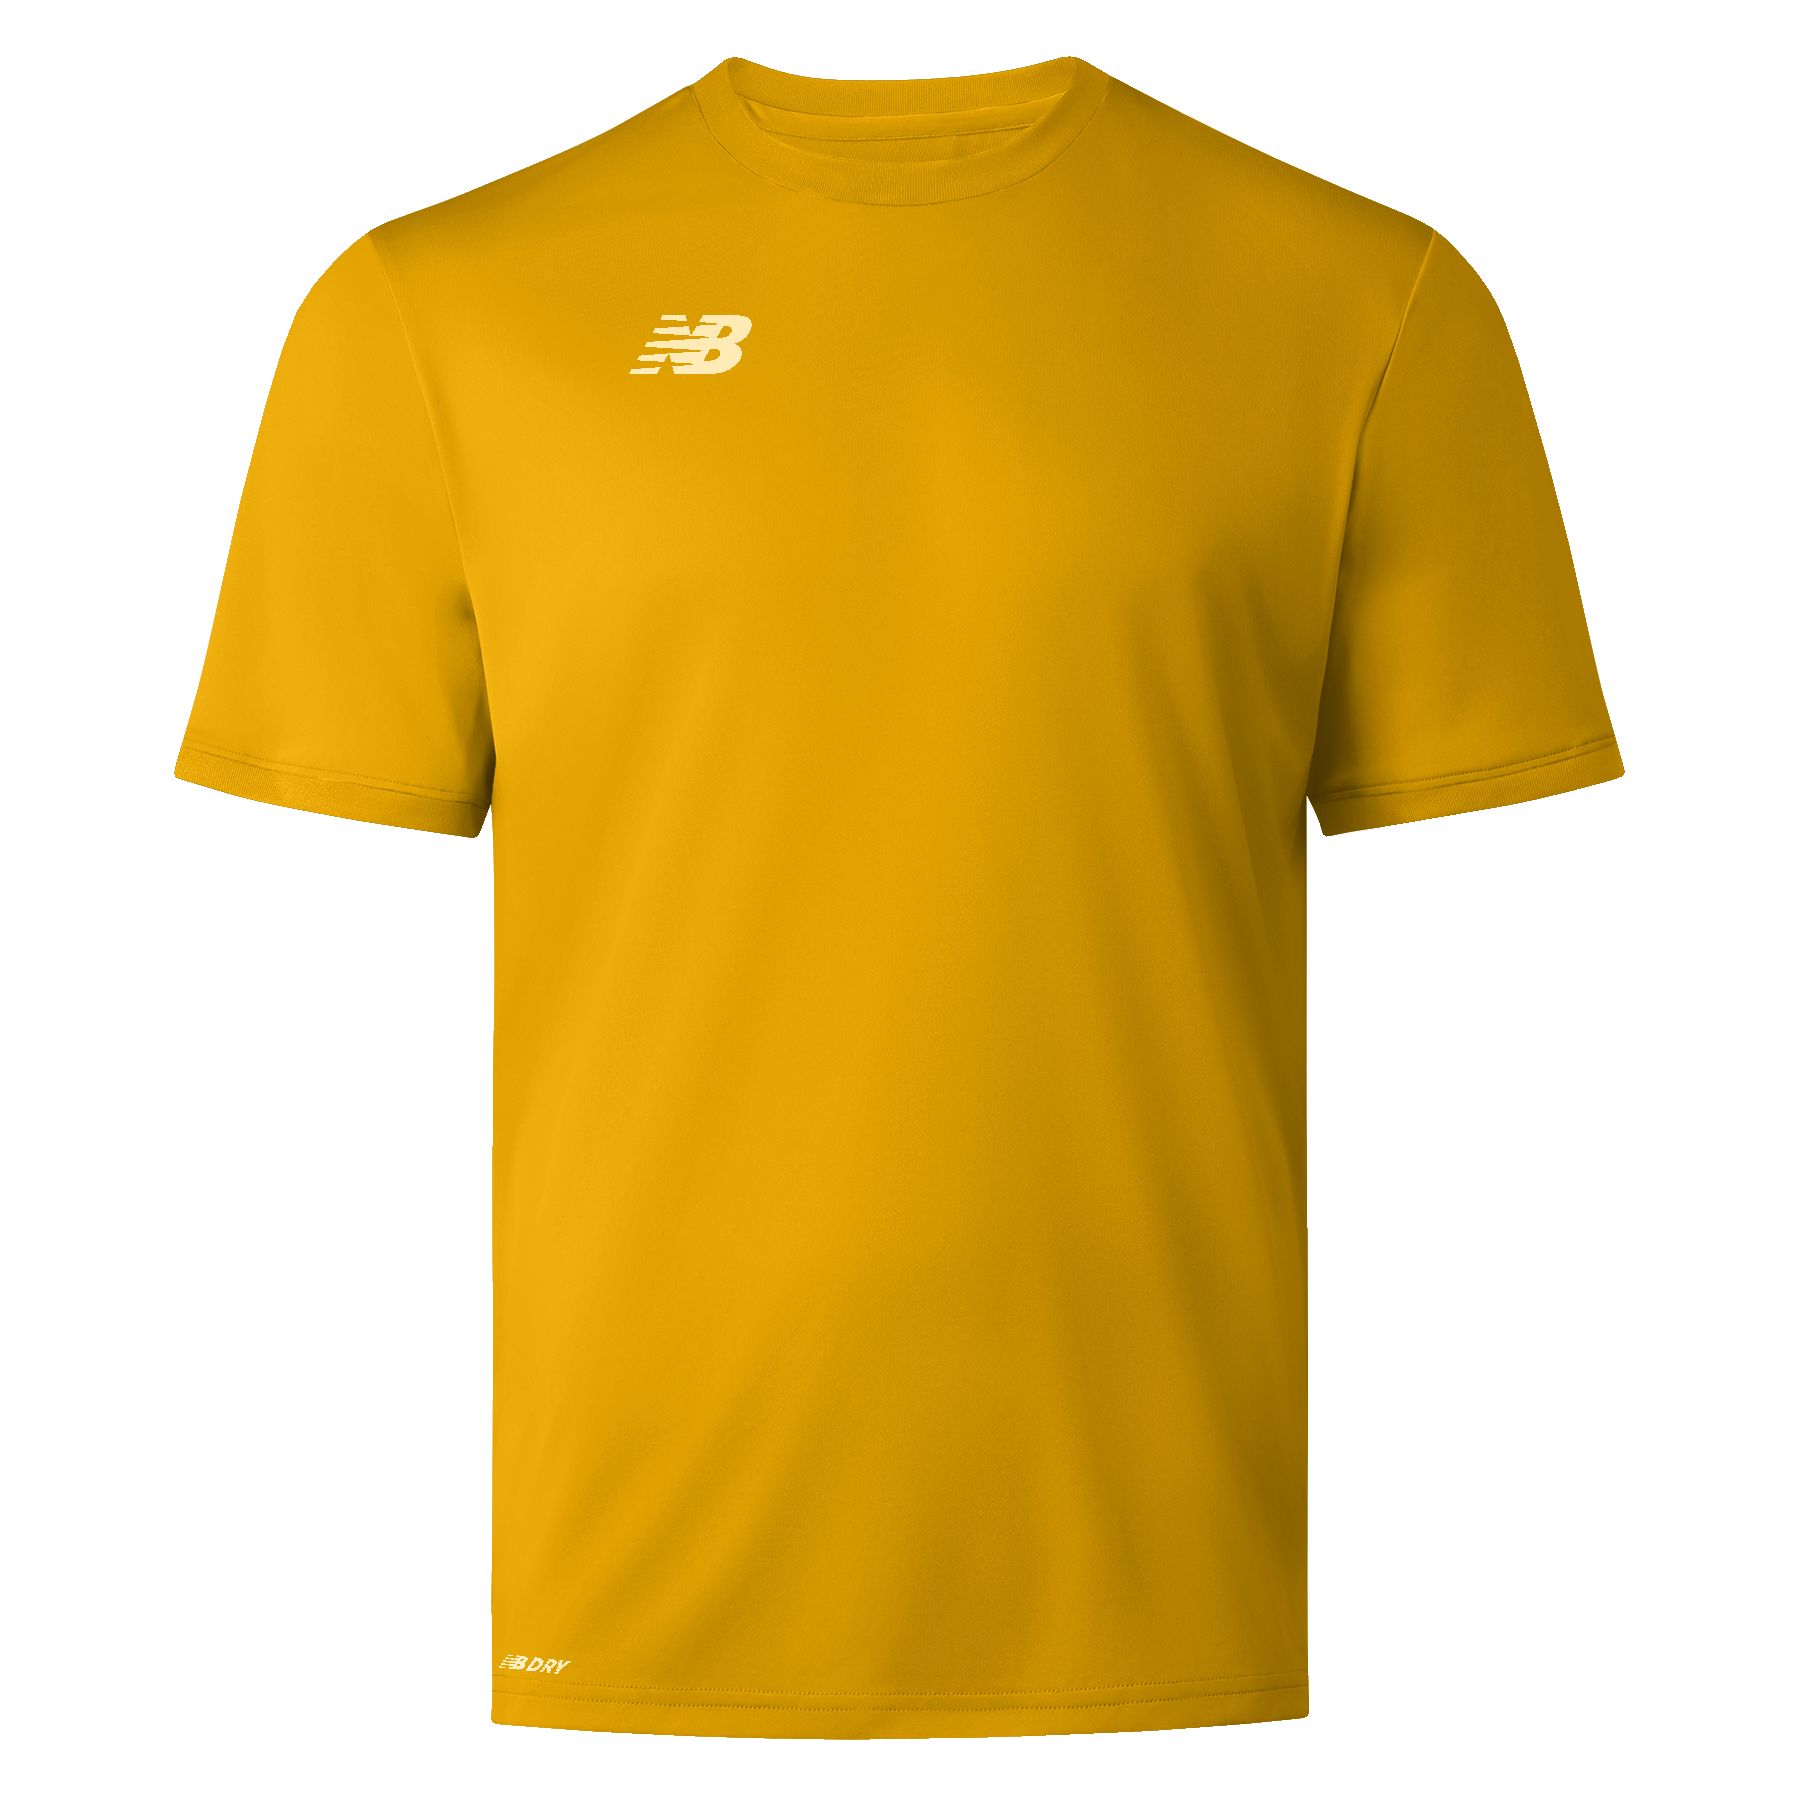 Athletic Goldproduct image